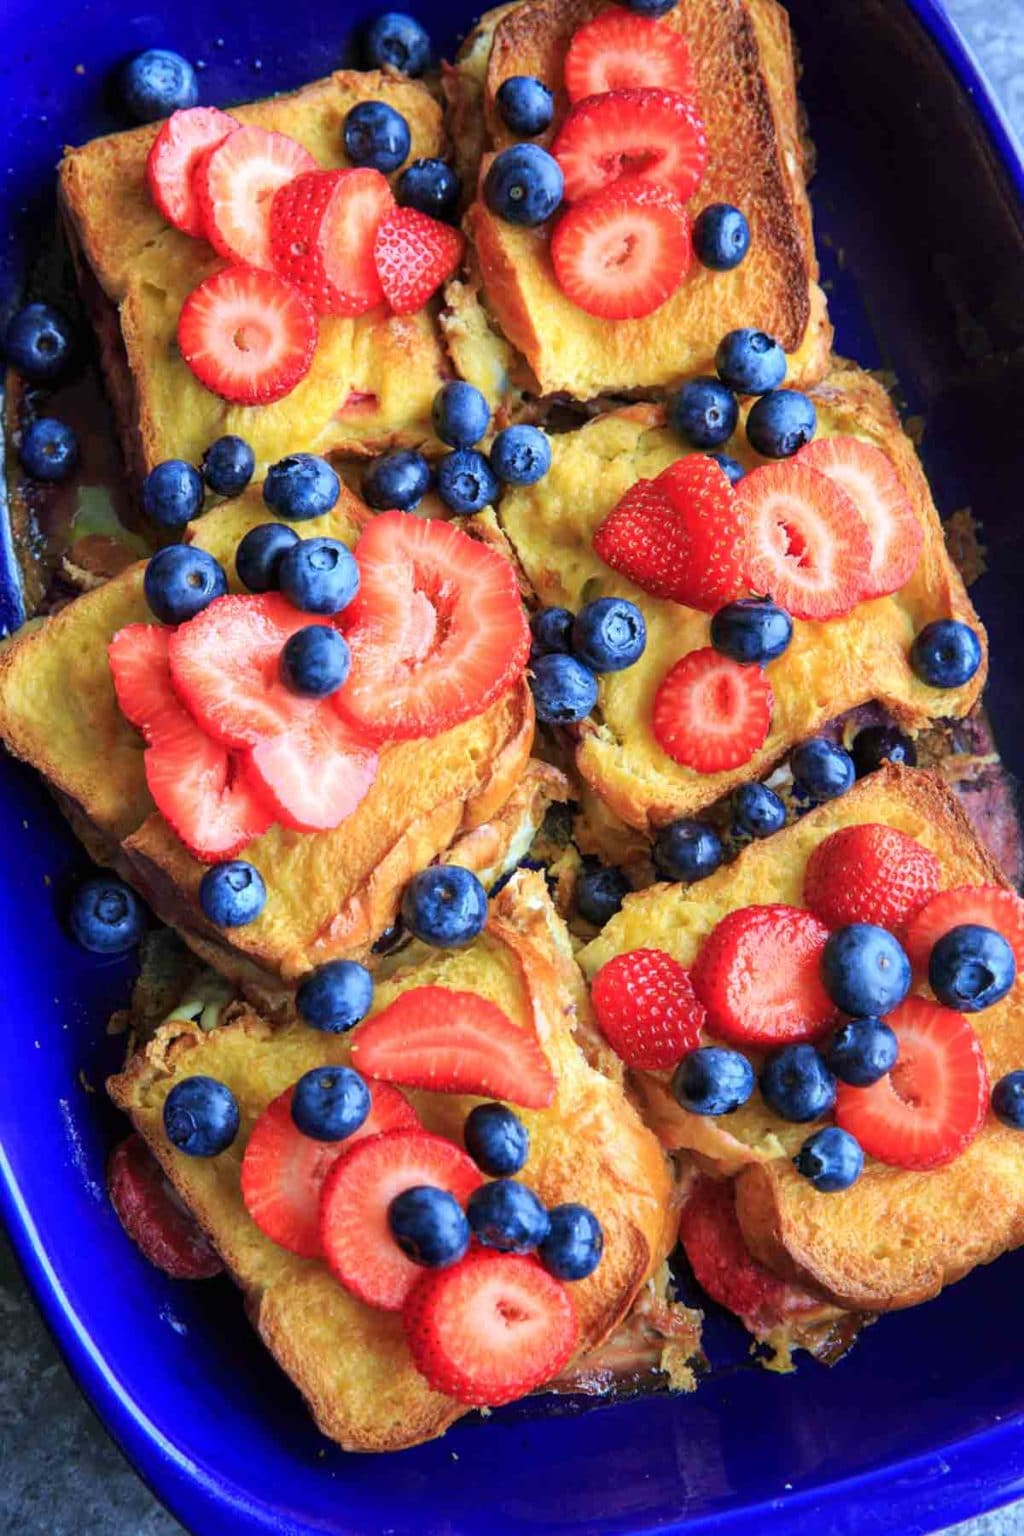 stuffed french toast with berries